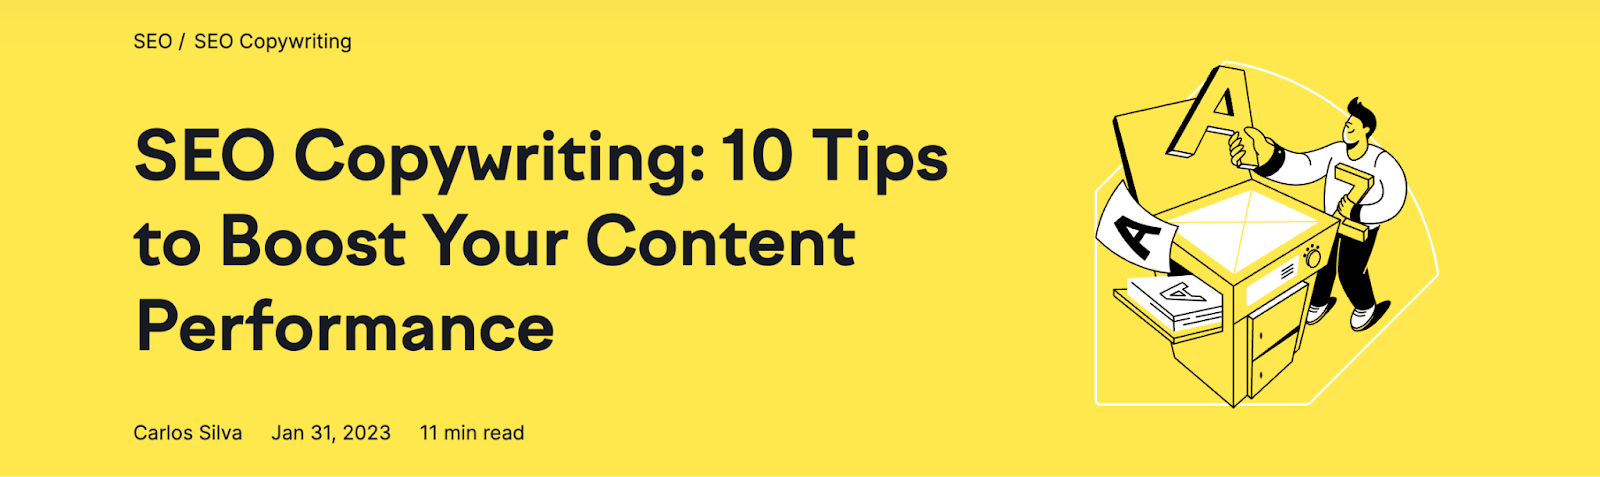 Example of a listicle title from Semrush blog "SEO Copywriting: 10 Tips to Boost Your Content Performance"